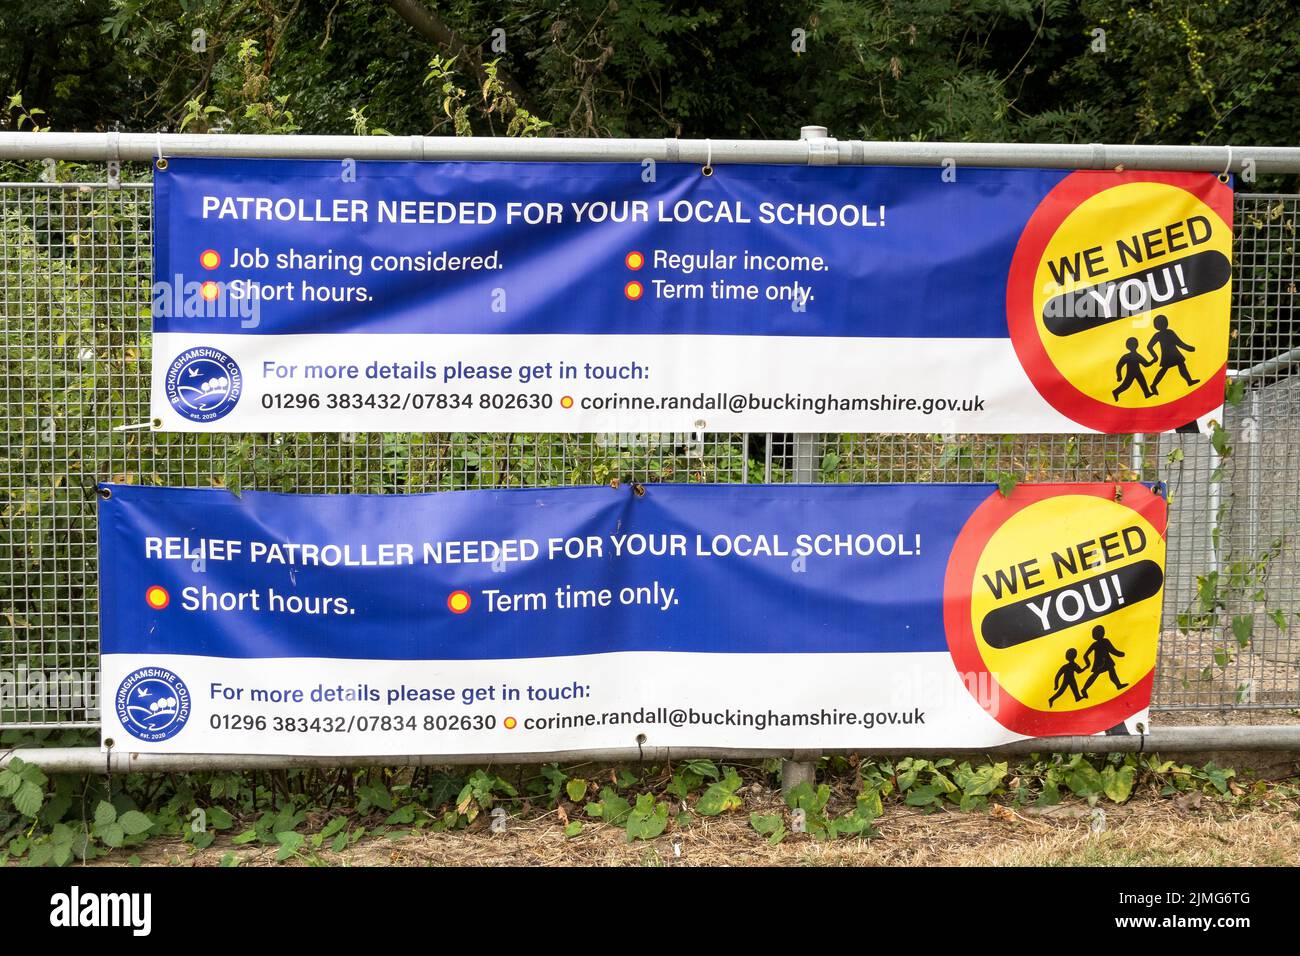 Roadside banners advertising for a Buckinghamshire school patroller and relief school patroller, also known as lollipop men and women, for a local school. There are currently around 60 patrollers in Buckinghamshire who assist children and adults to safely cross busy roads. Patrollers are sometimes verbally abused by motorists. A patroller needs to be in place for the start of Autumn term on September 5th 2022. Credit: Stephen Bell/Alamy Stock Photo